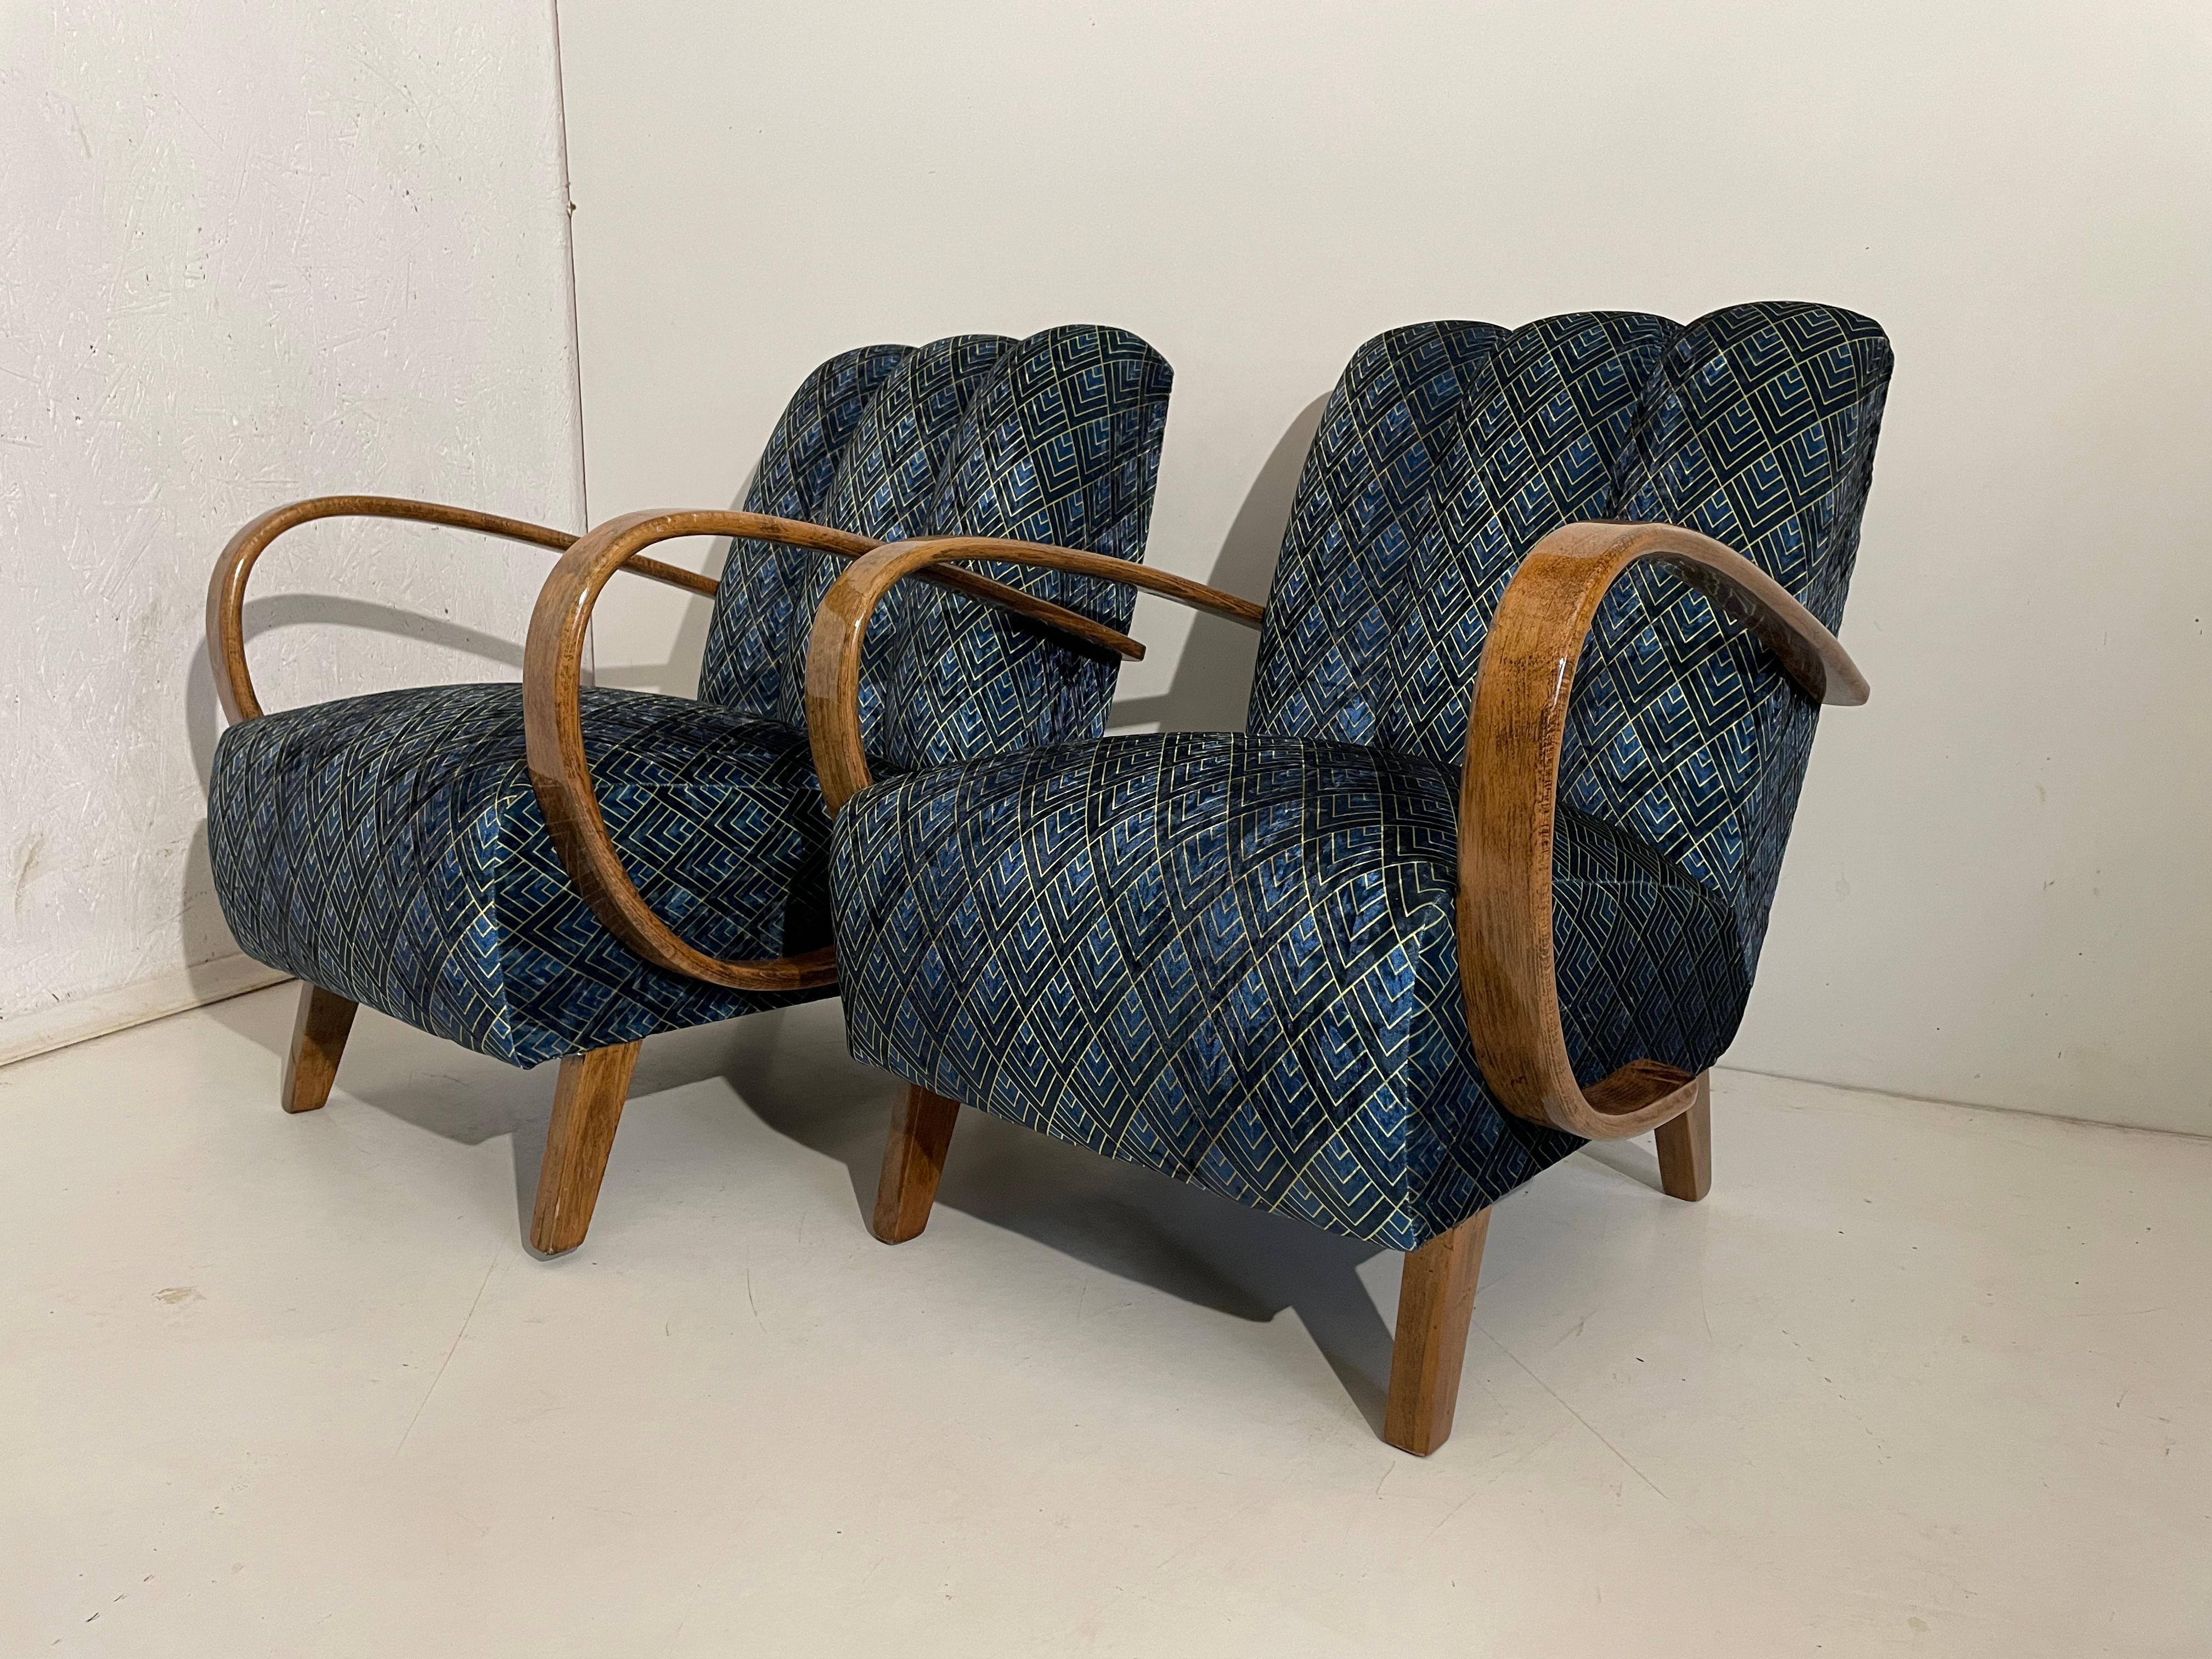 2 Art Deco armchair from 1940, Czech Republic.
Designed by a famous Czech designer Jindrich Halabala, (a Czech designer ranked among the most outstanding creators of the modern period. The peak of his career fell on the 1930s and 1940s when he